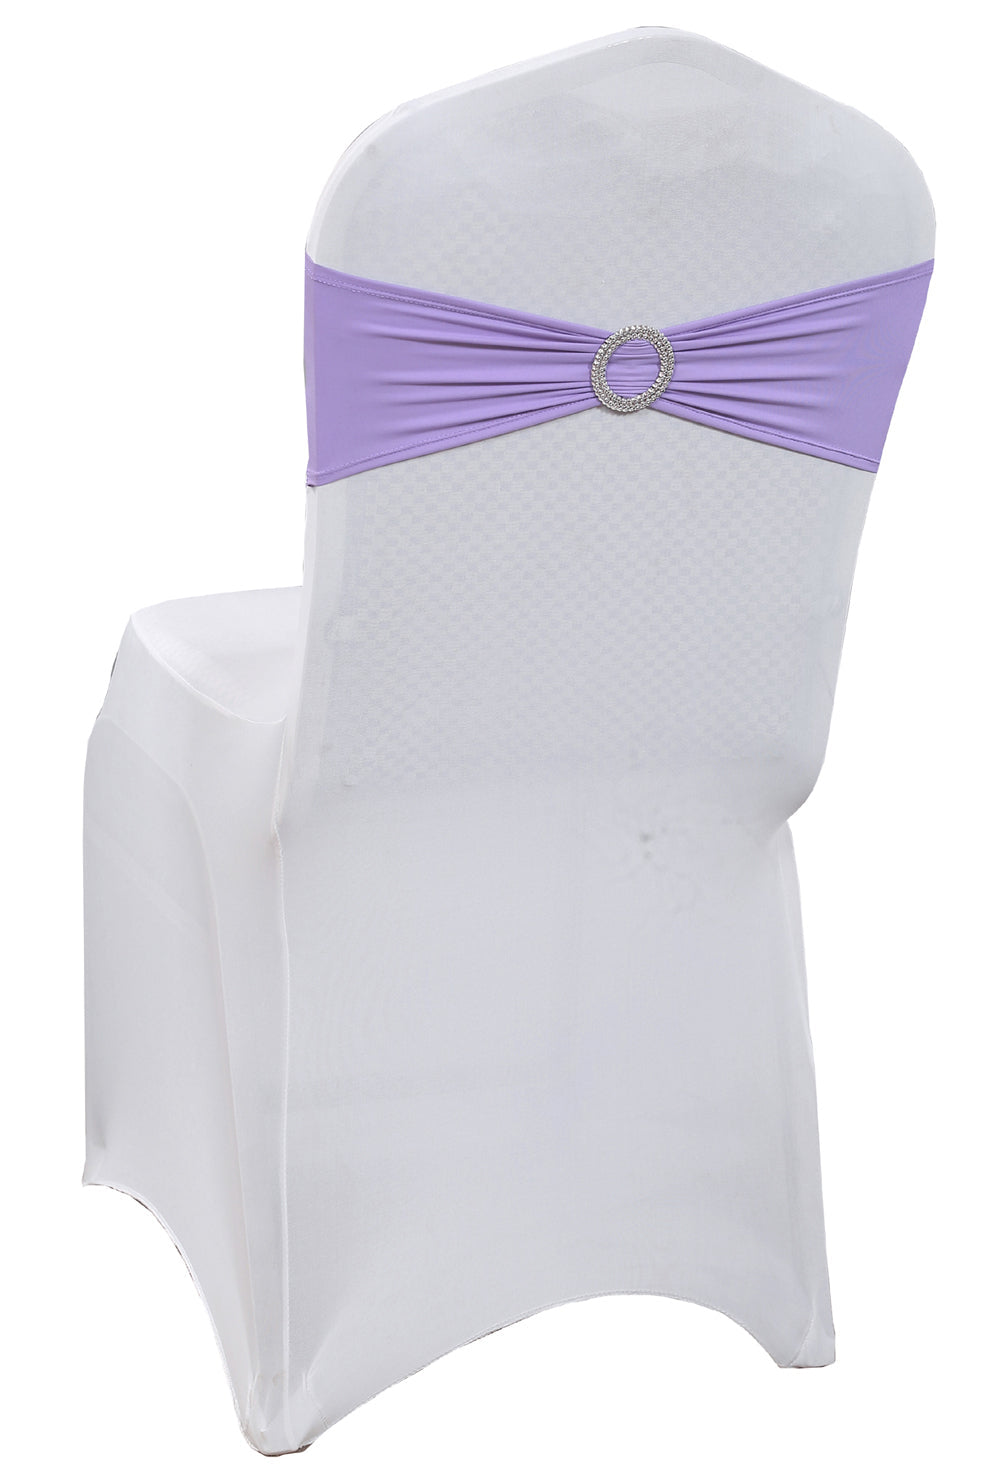 Lavender,2aed98dc-c221-412f-8a44-1aa782c3bc2d